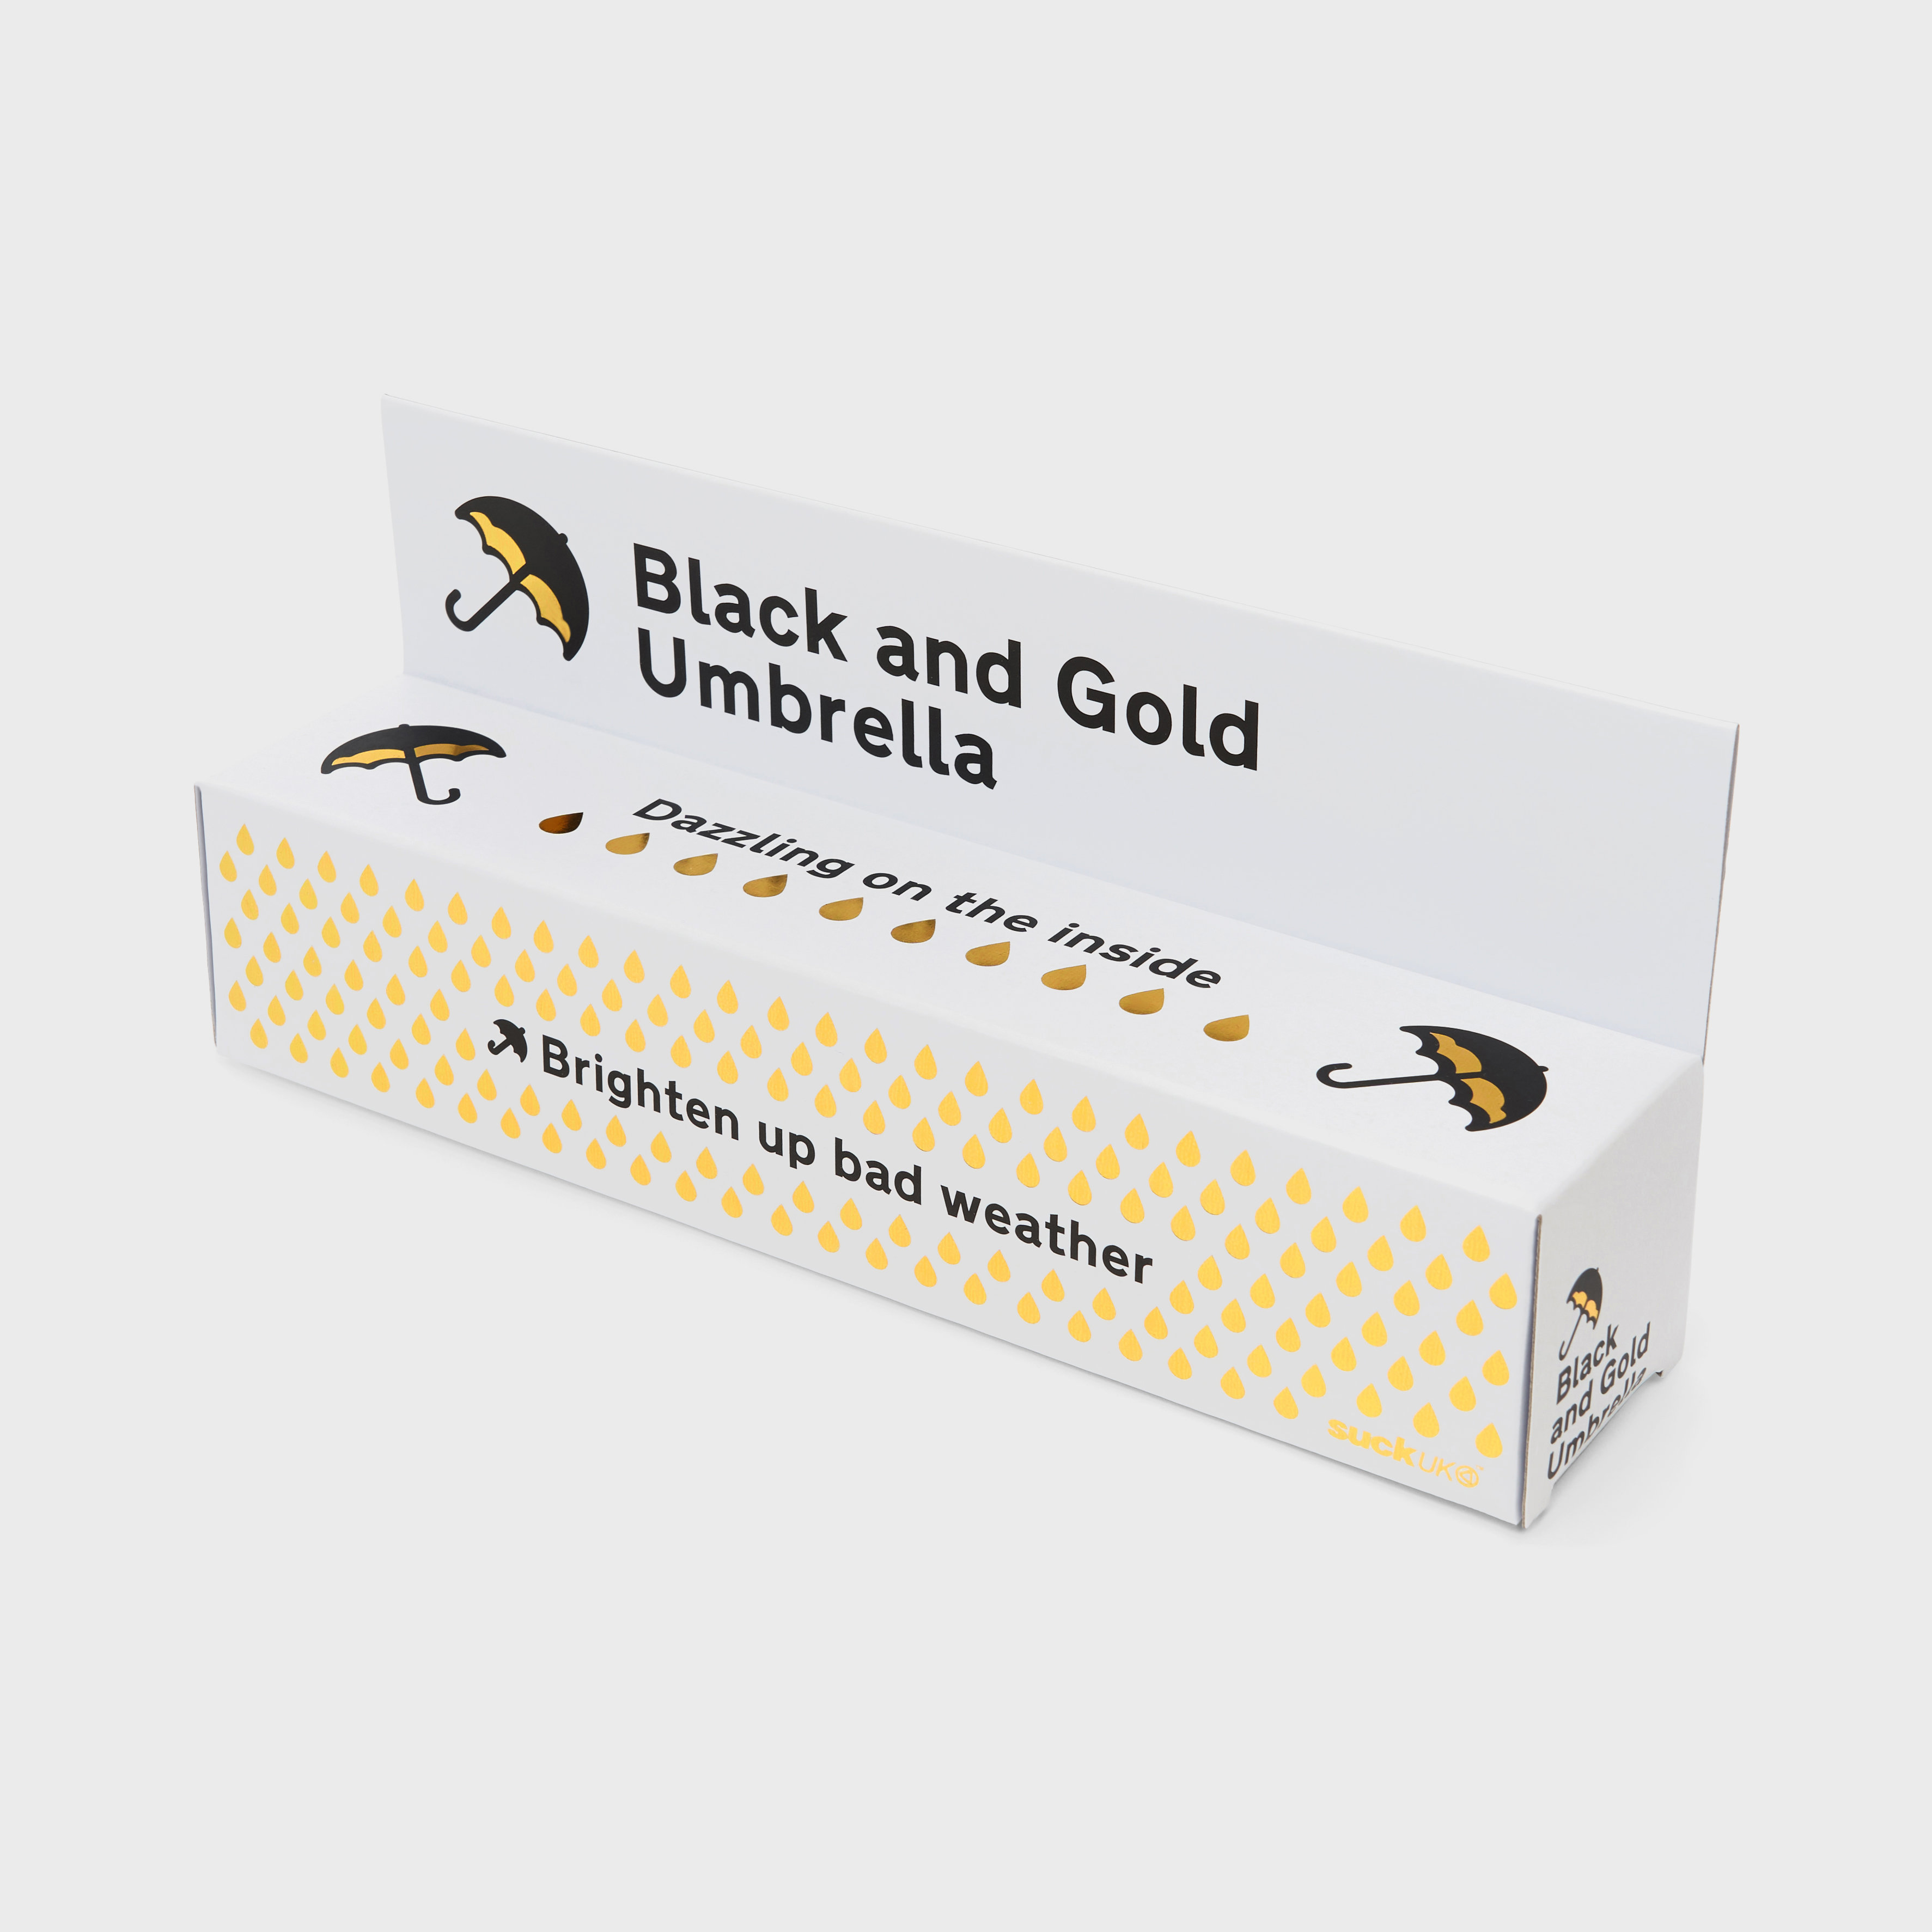 Packaging for Black and Gold Umbrella - foil on white